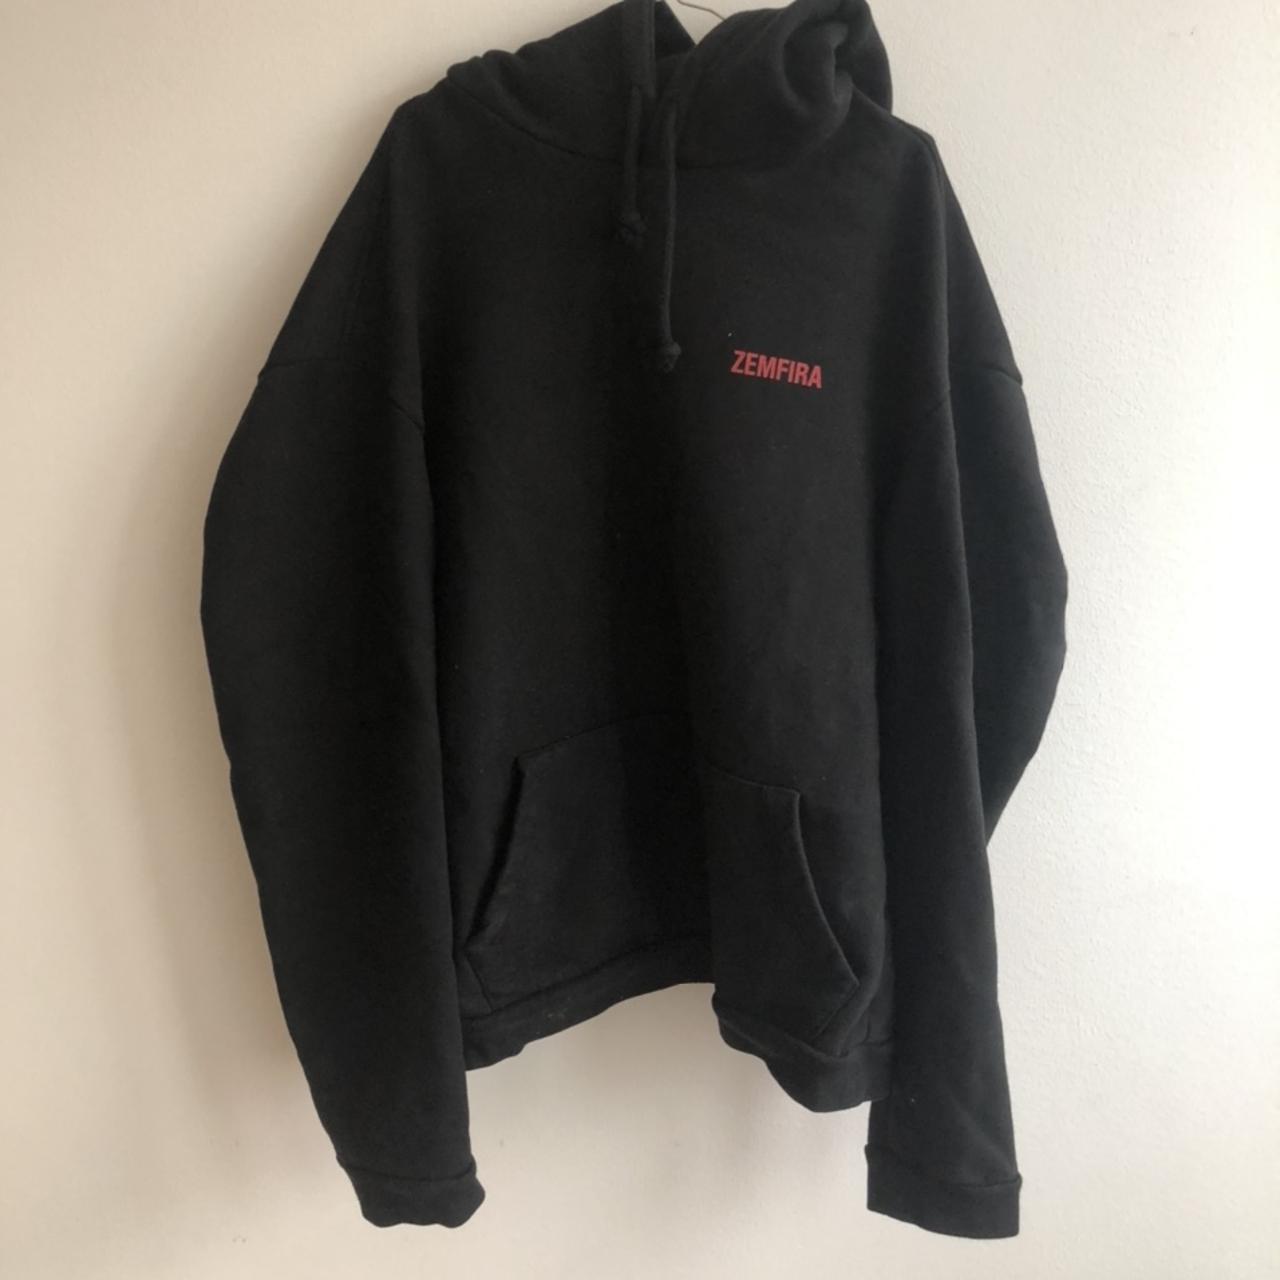 VETEMENTS “ZEMFIRA” HOODIE Only 50 made in the world - Depop